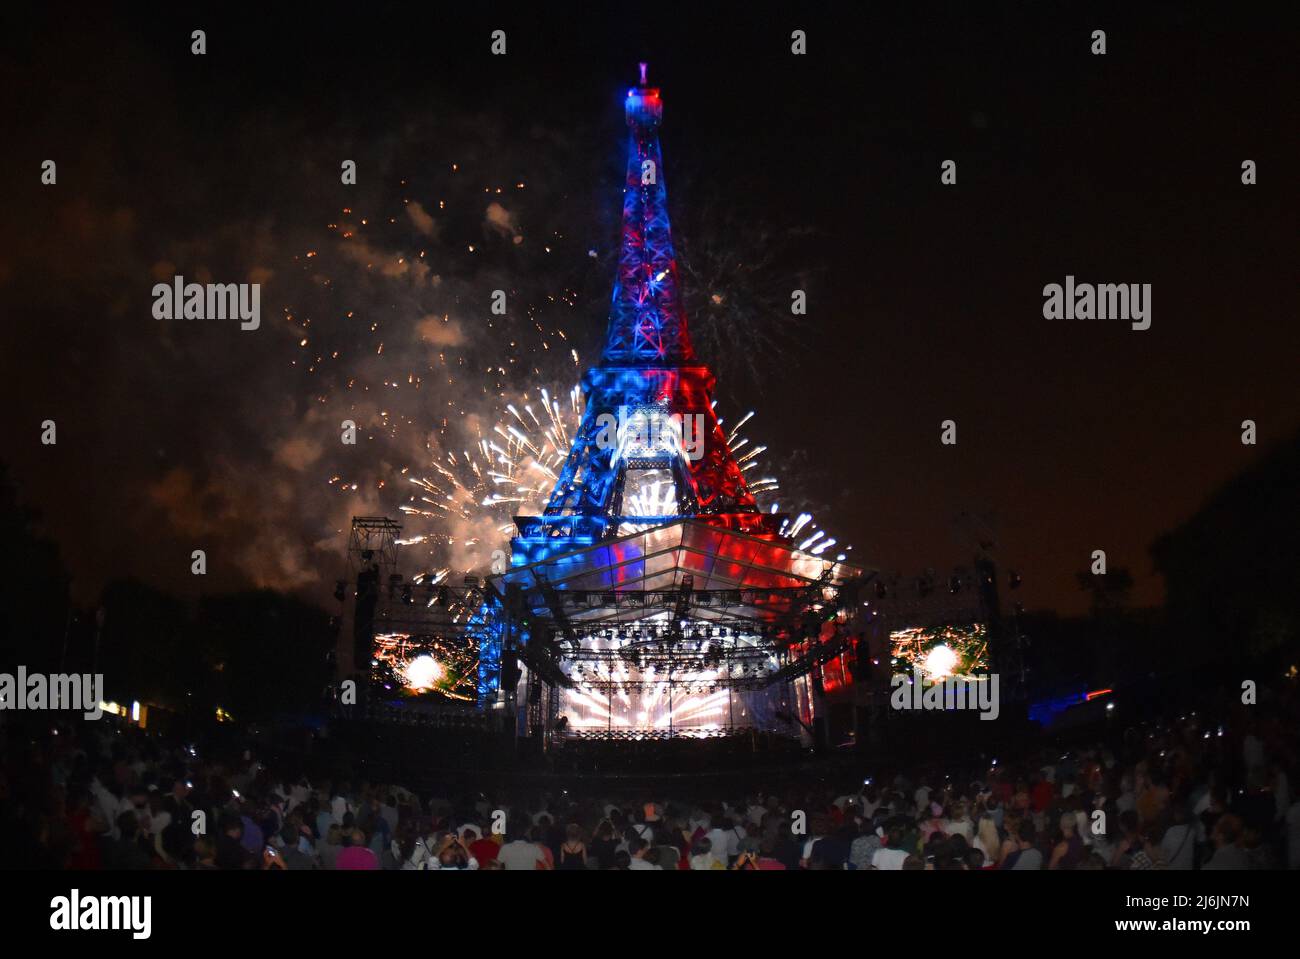 Fireworks on Eiffel tower in Paris for french national day  Tour eifel feu d'artifice Stock Photo